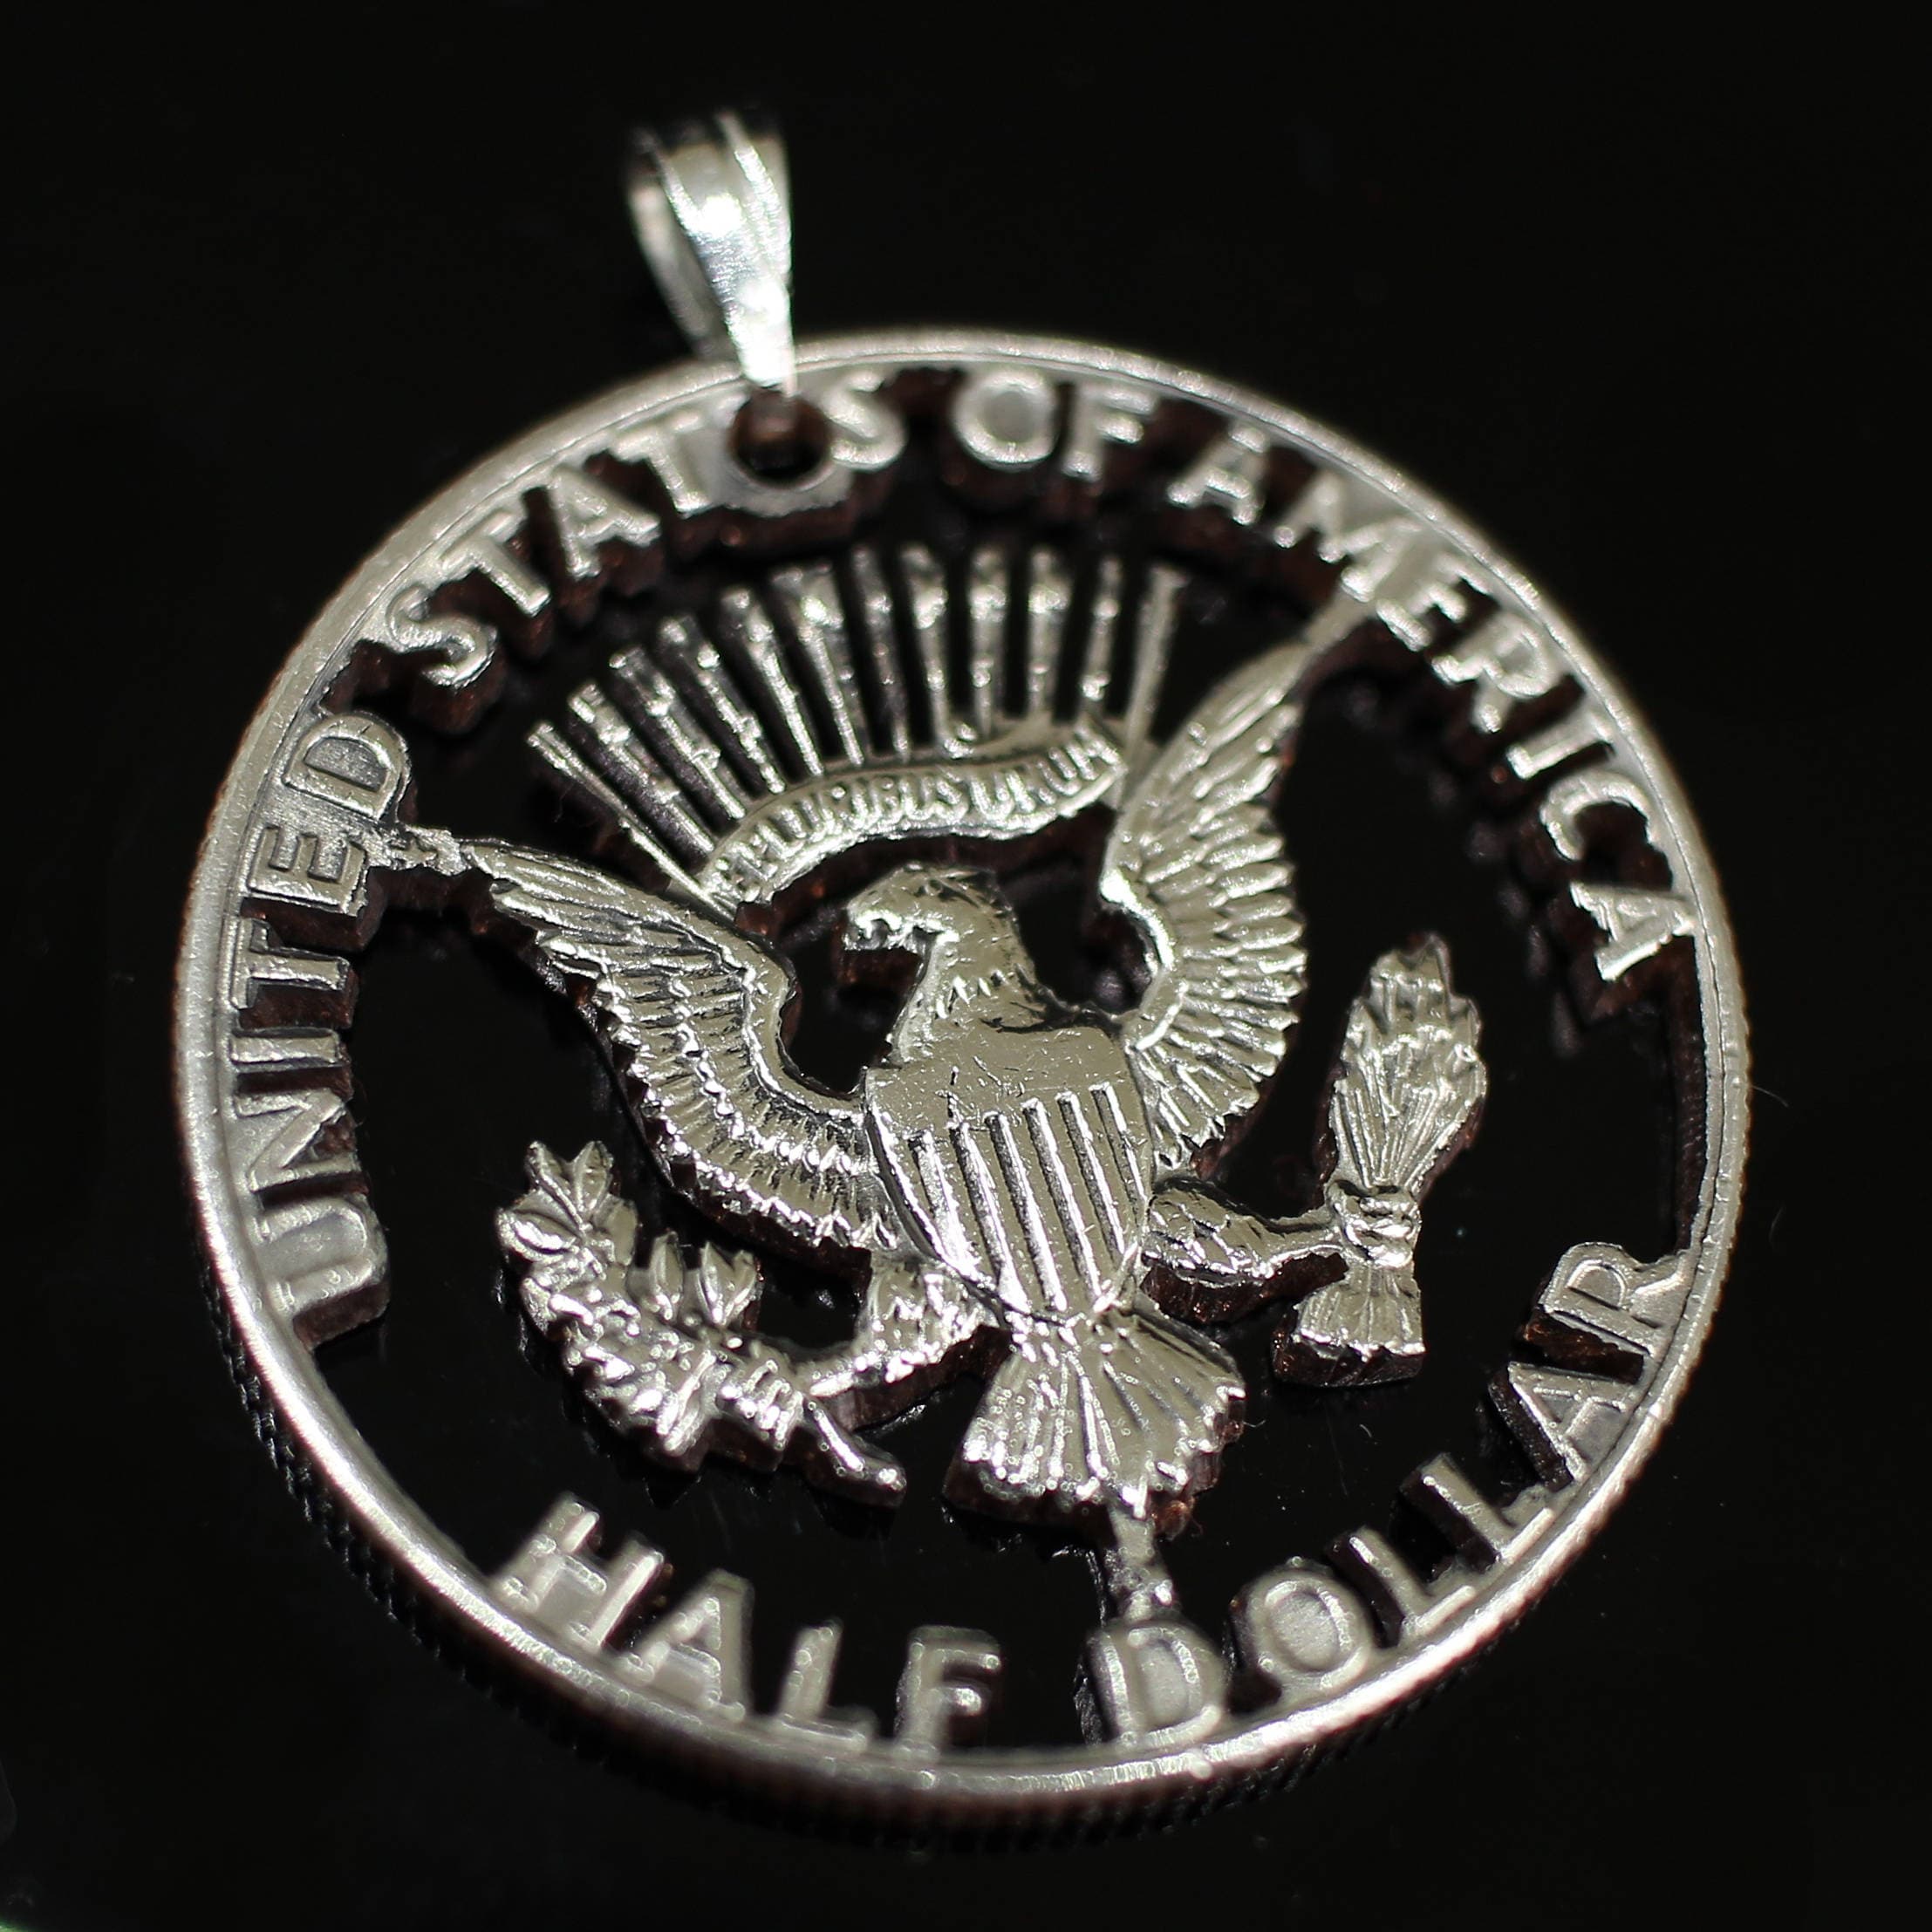 Details about   Hand cut coin United States Half Dollar Eagle 